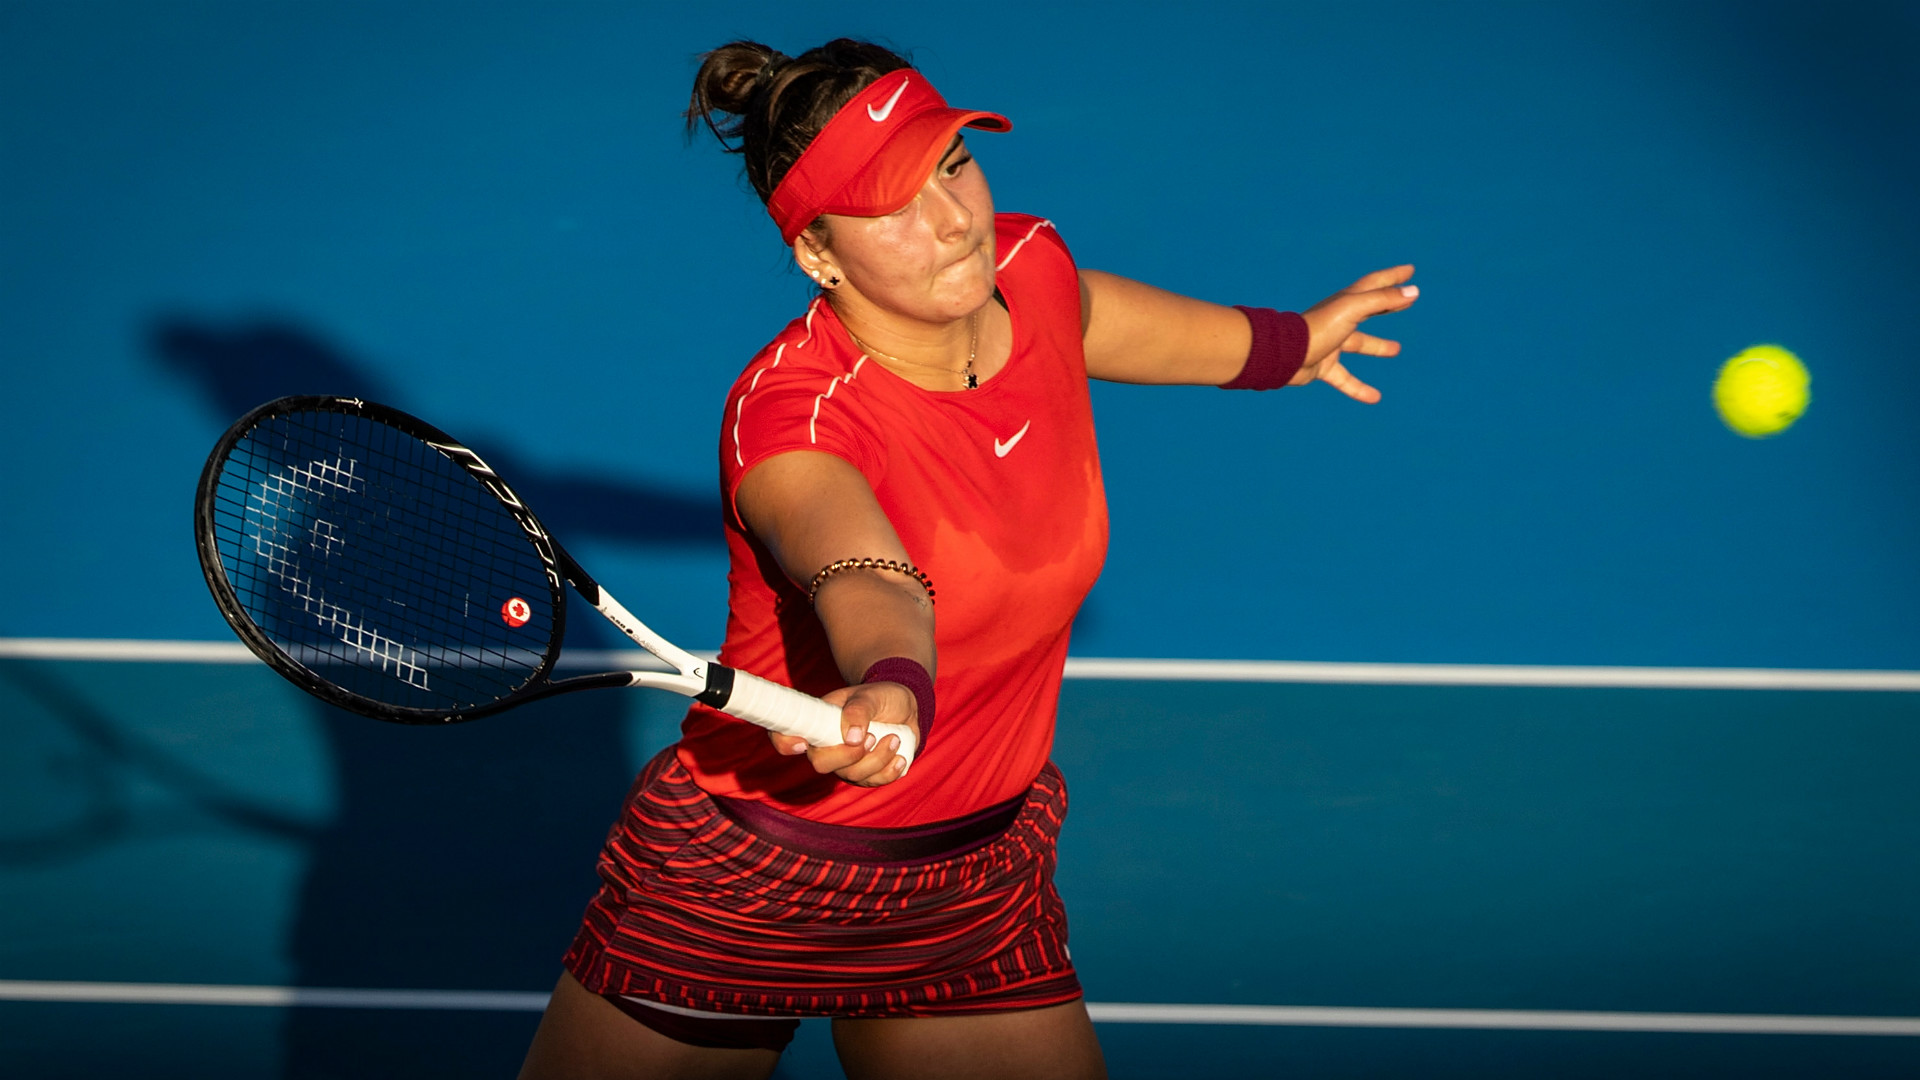 Canadian Teenager Bianca Andreescu Prepares For First Wta Final